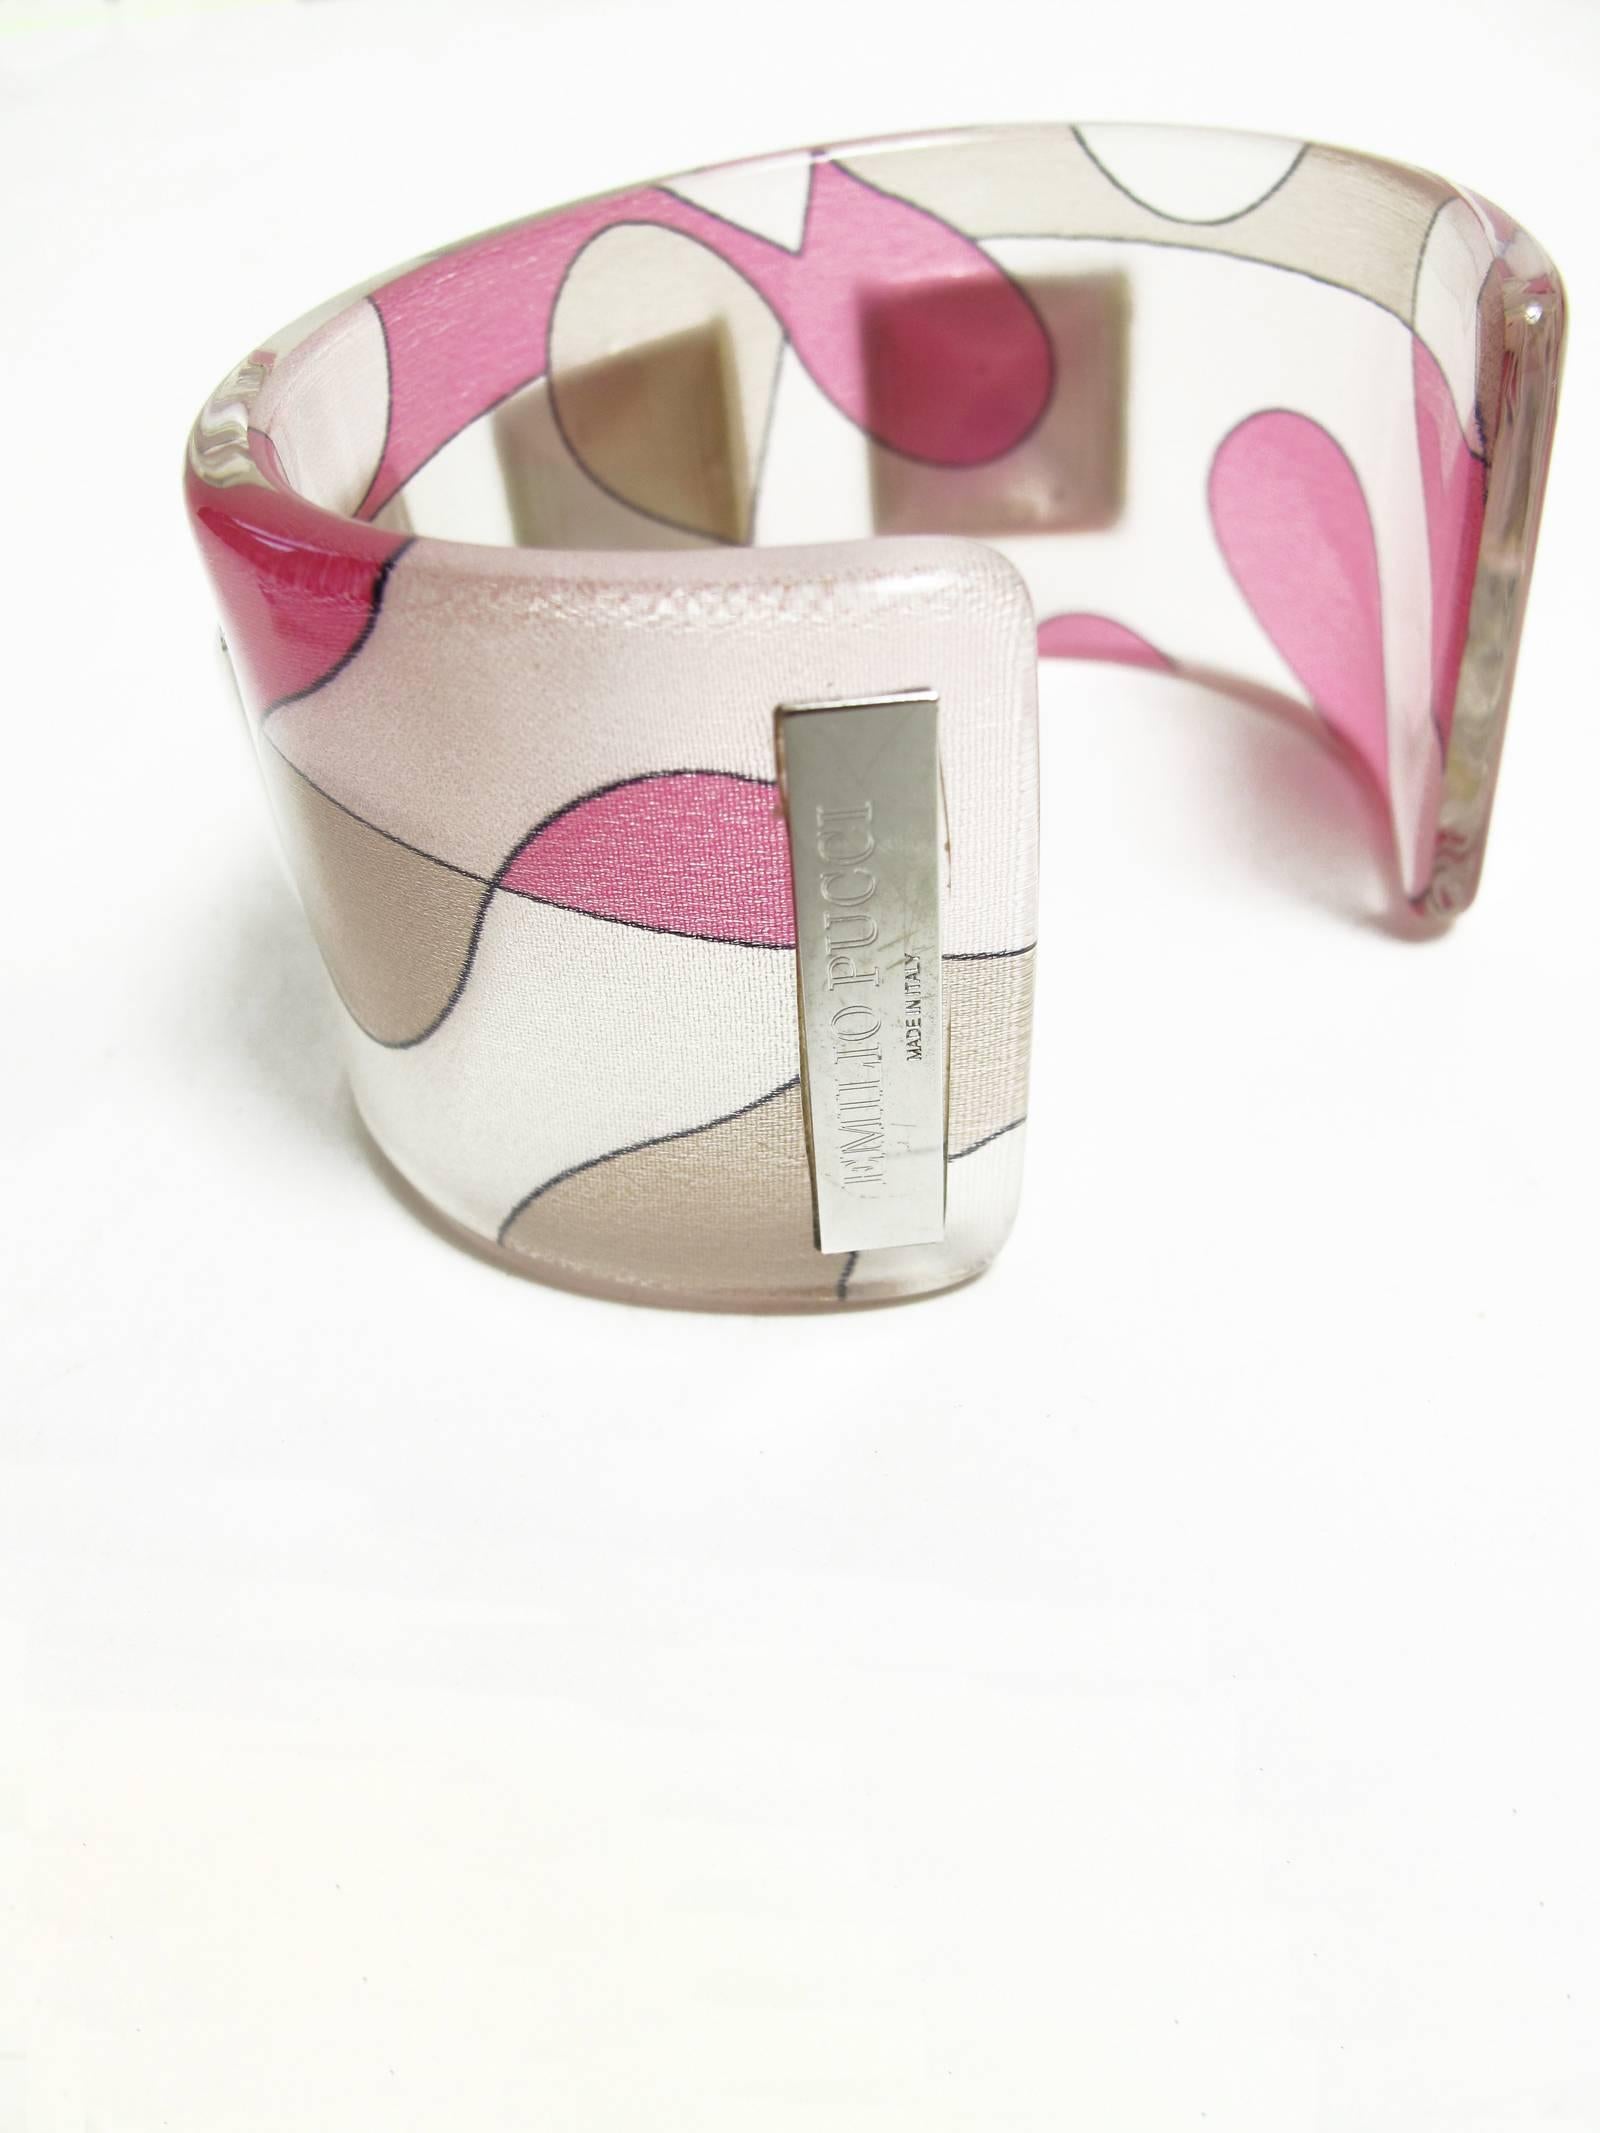 Pucci mixed pinks swirl lucite cuff with stud grommets. Condition: Excellent. 

We accept returns for refund, please see our terms.  We offer free ground shipping within the US.  Please let us know if you have any questions. 
